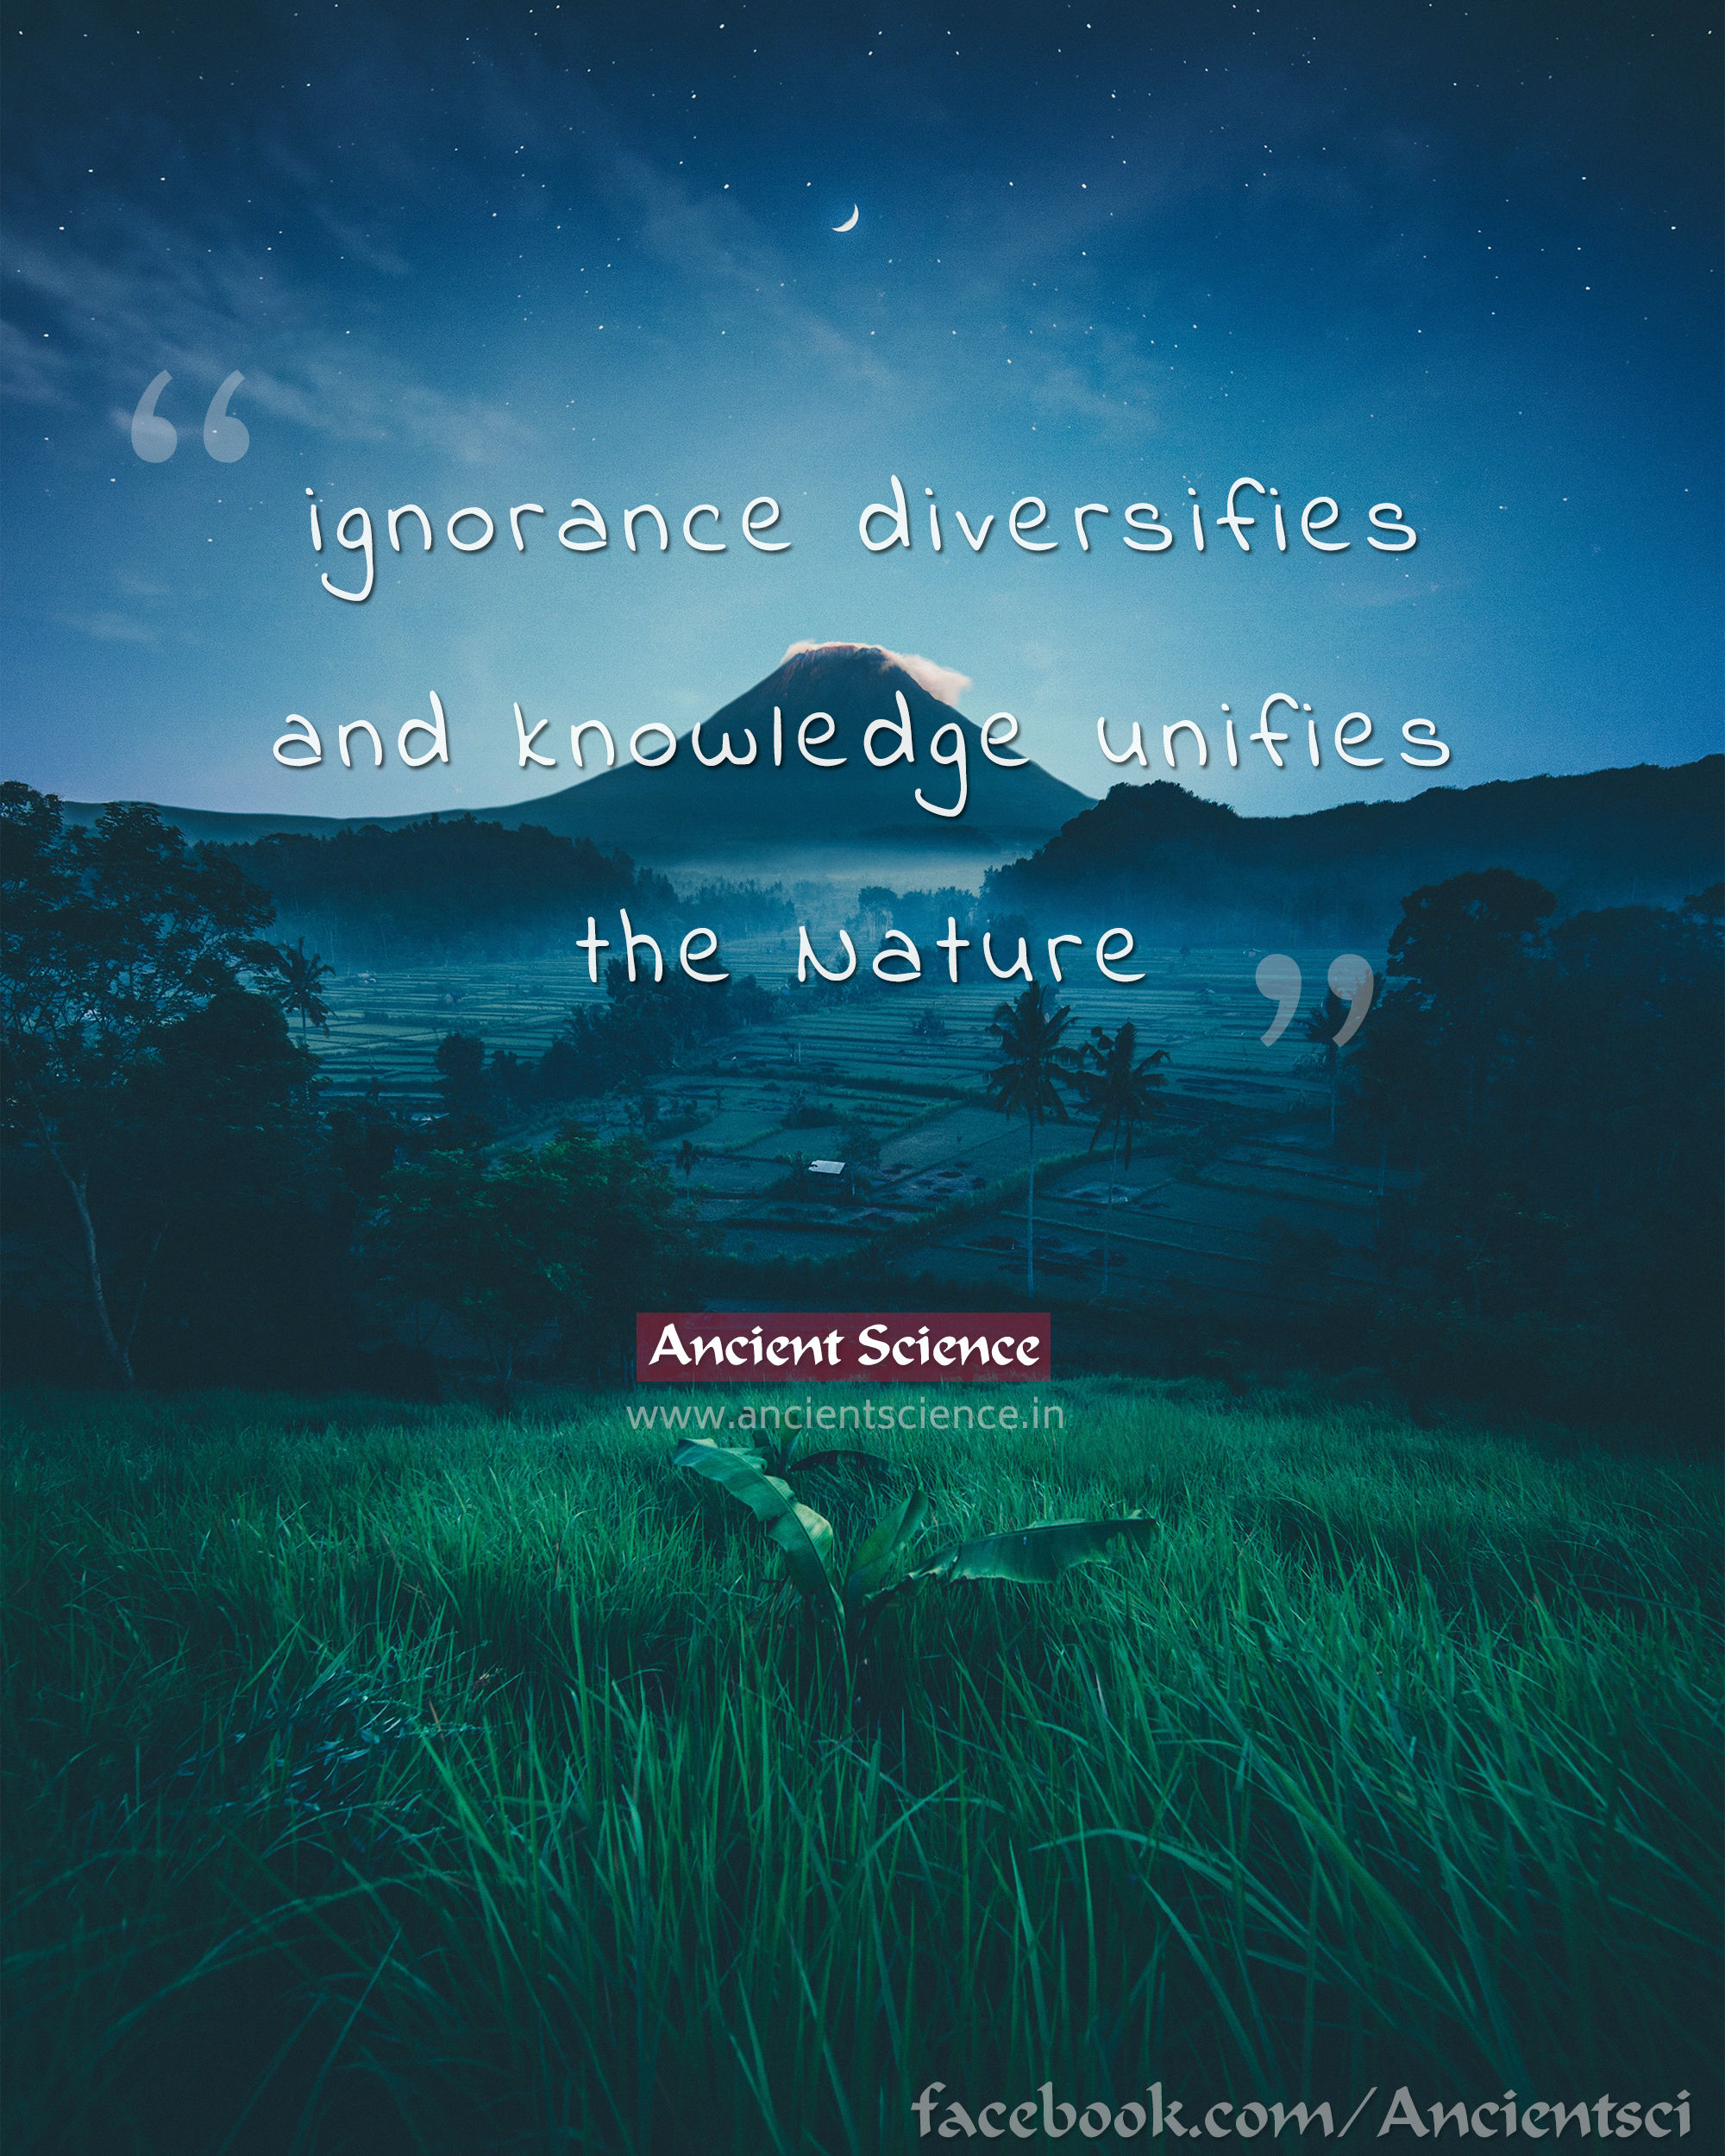 Ignorance diversifies and knowledge unifies the nature.